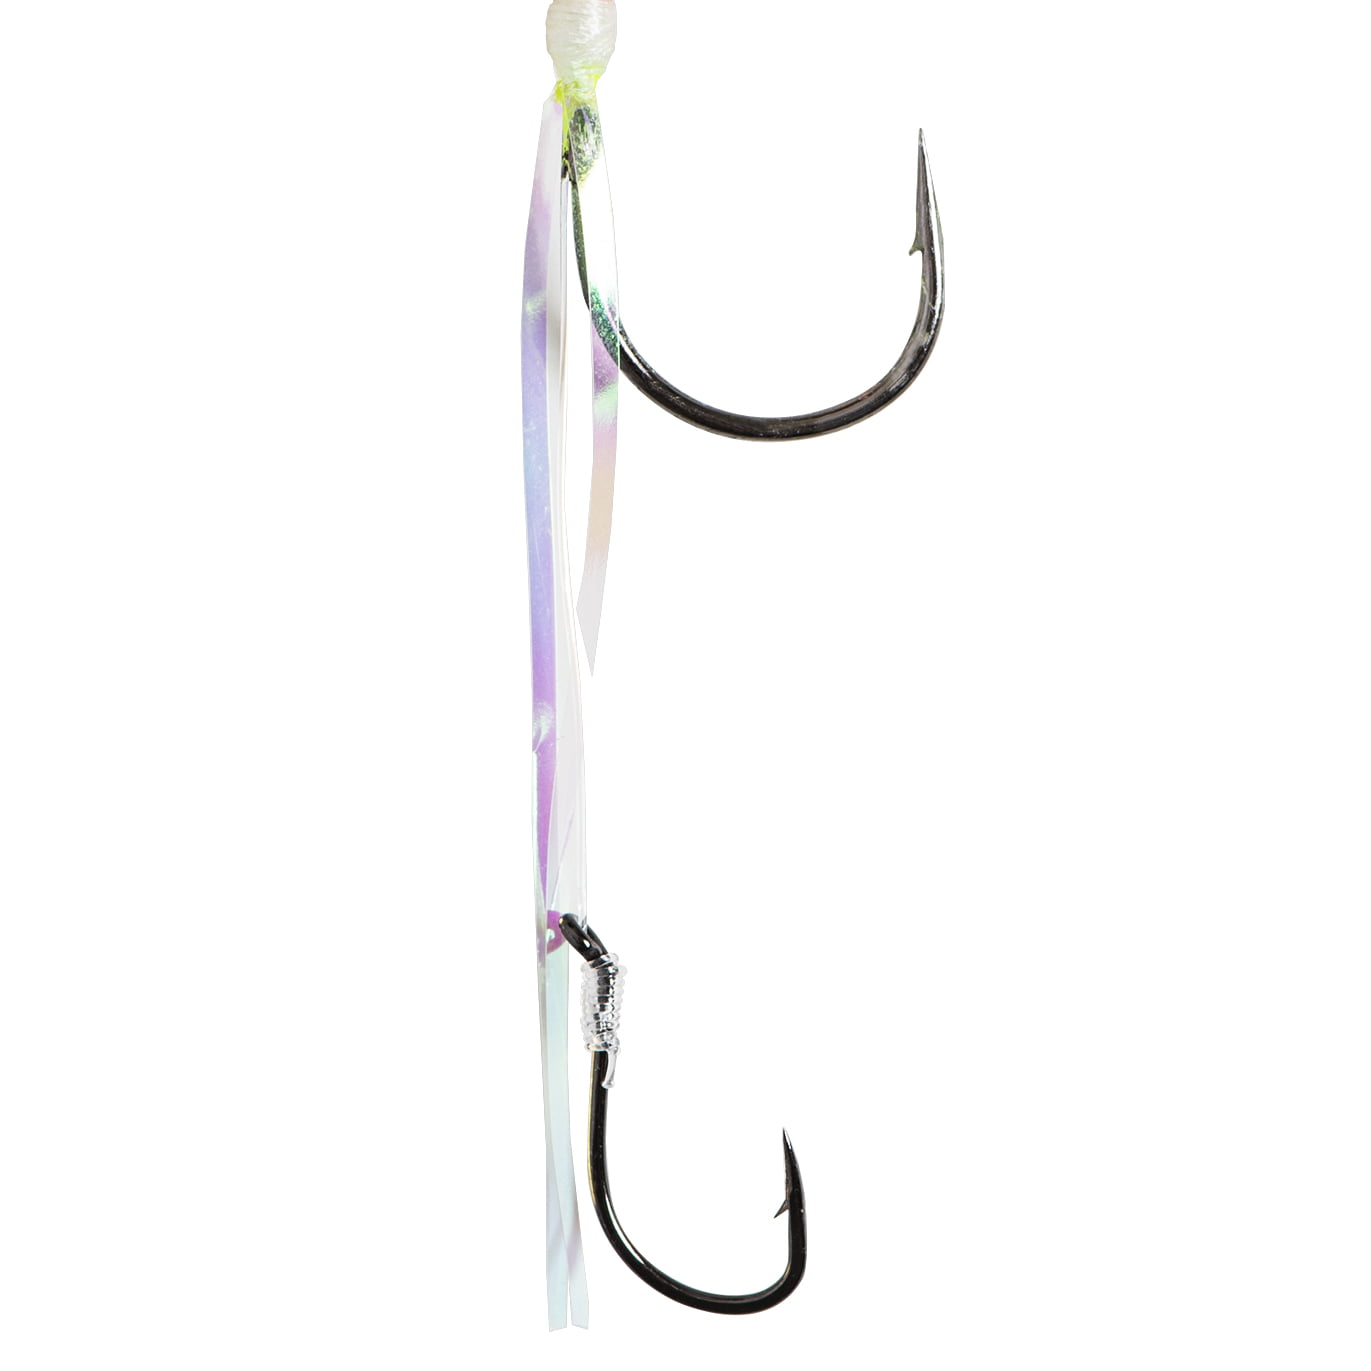 Mustad Walleye Death Spinner Lure, Pink and White, 1/4oz